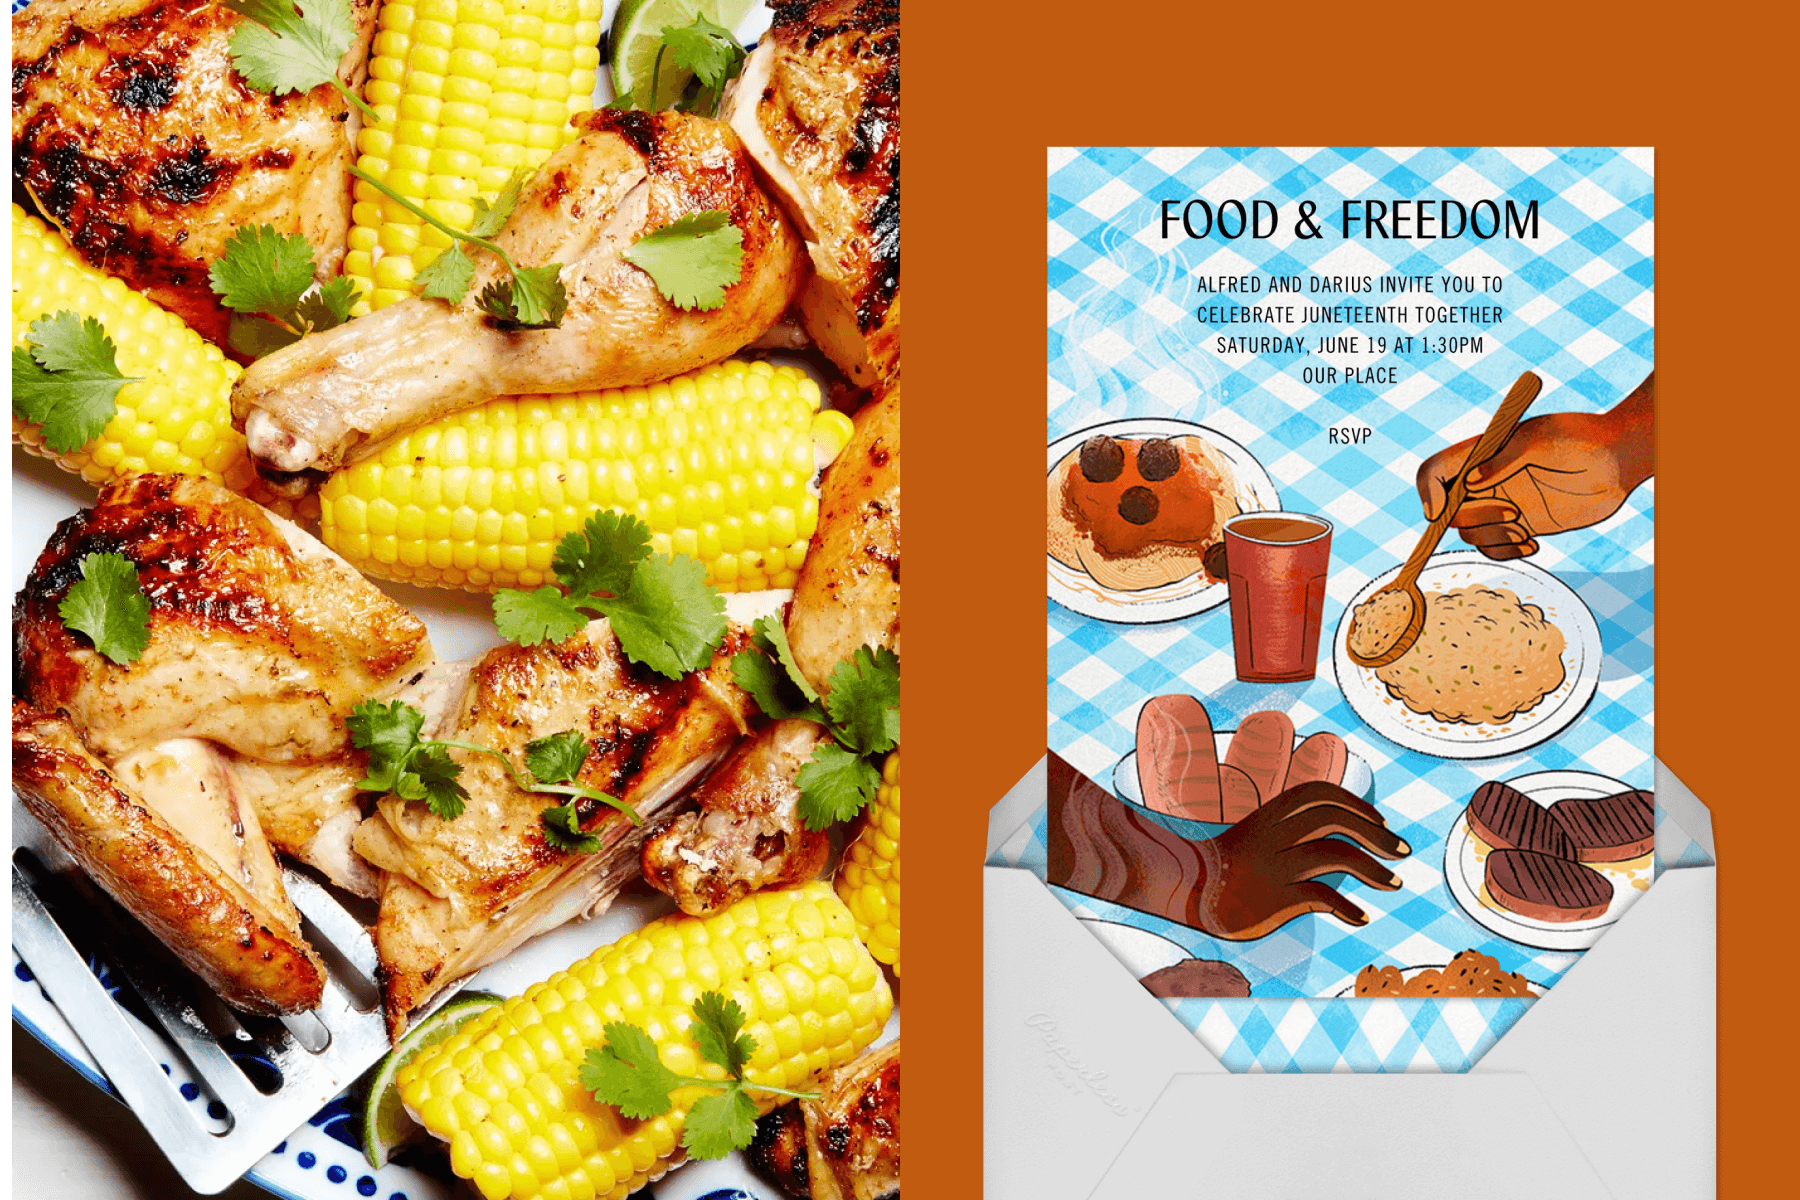 Left: Overhead photo of grilled chicken and corn on the cob; Right: A Juneteenth invitation featuring people serving potluck-style food on a blue gingham tablecloth.